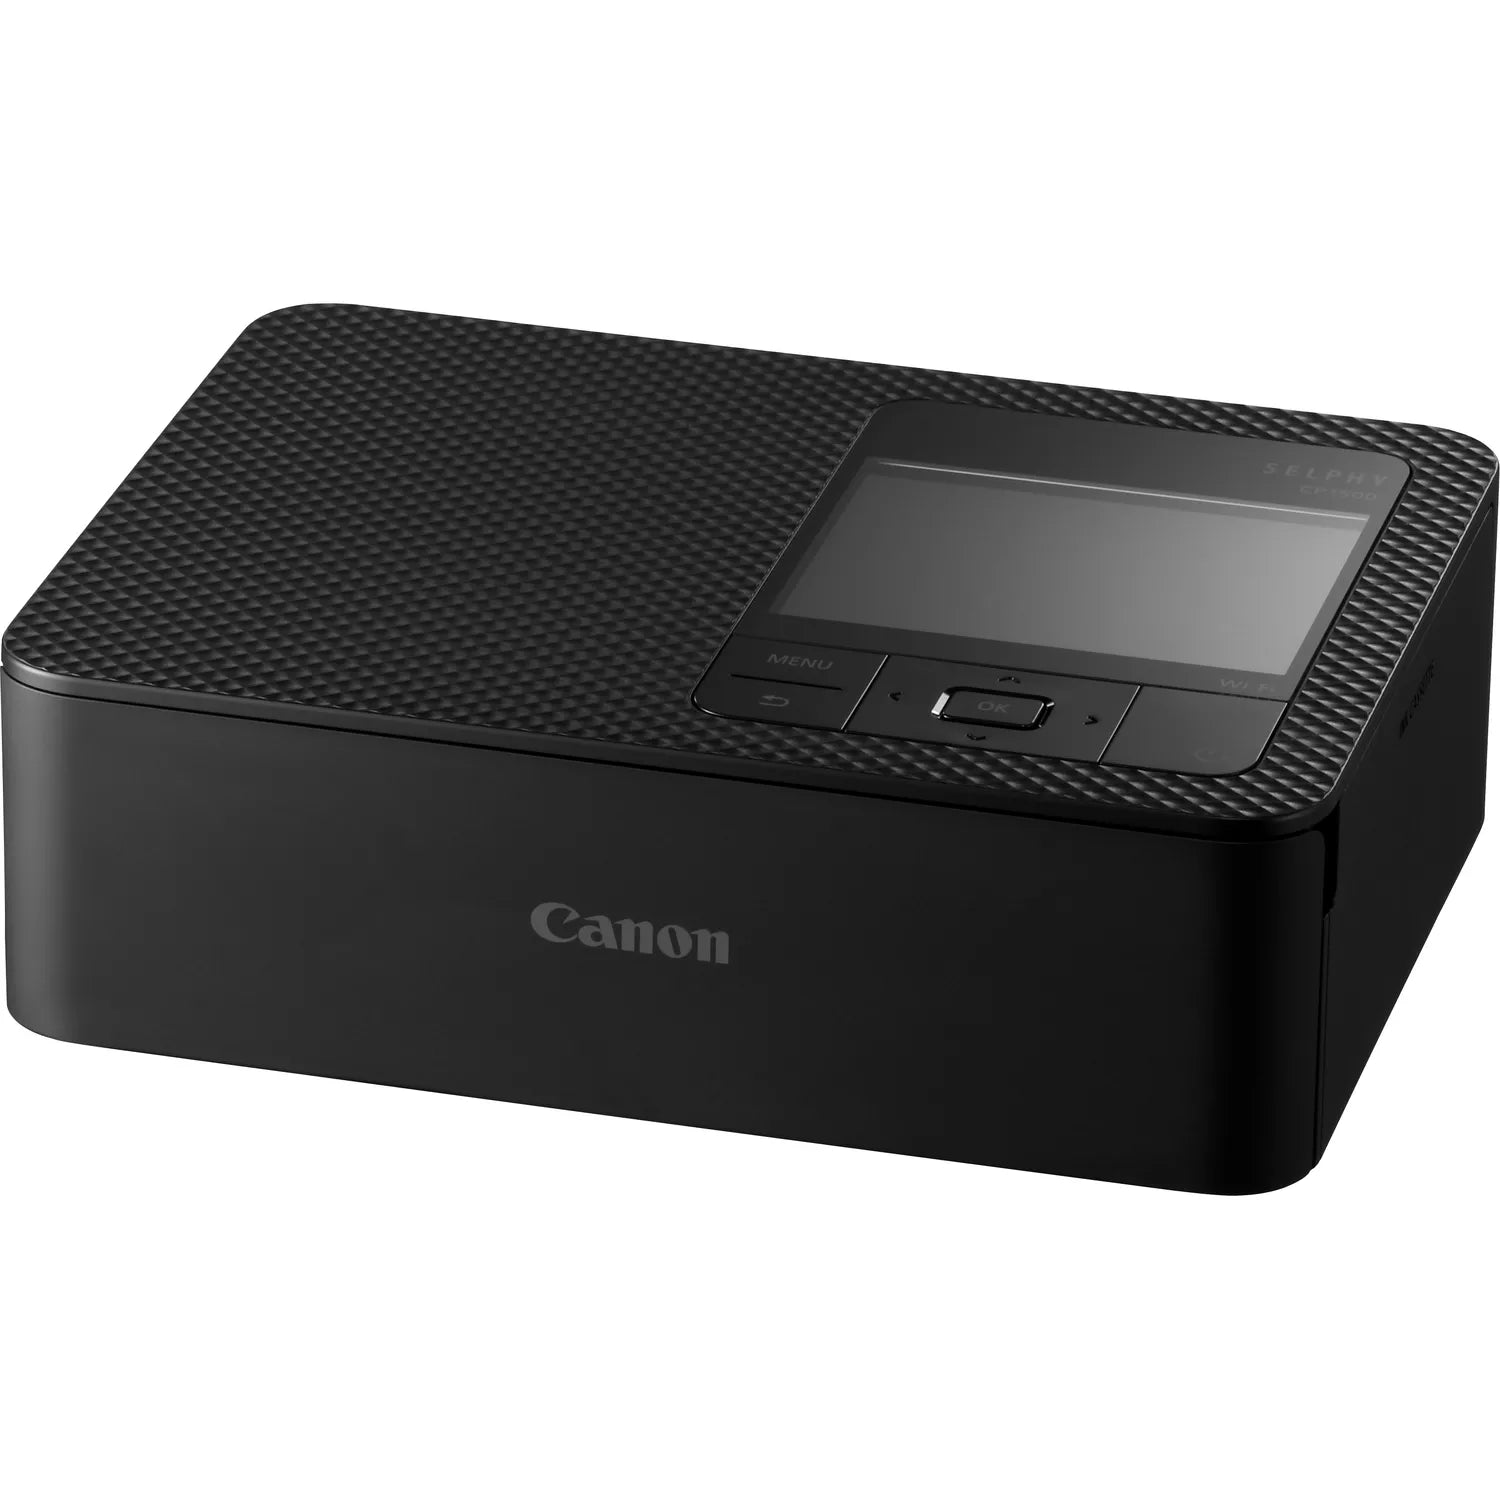 Clearance Canon SELPHY CP1500 Printer - Black